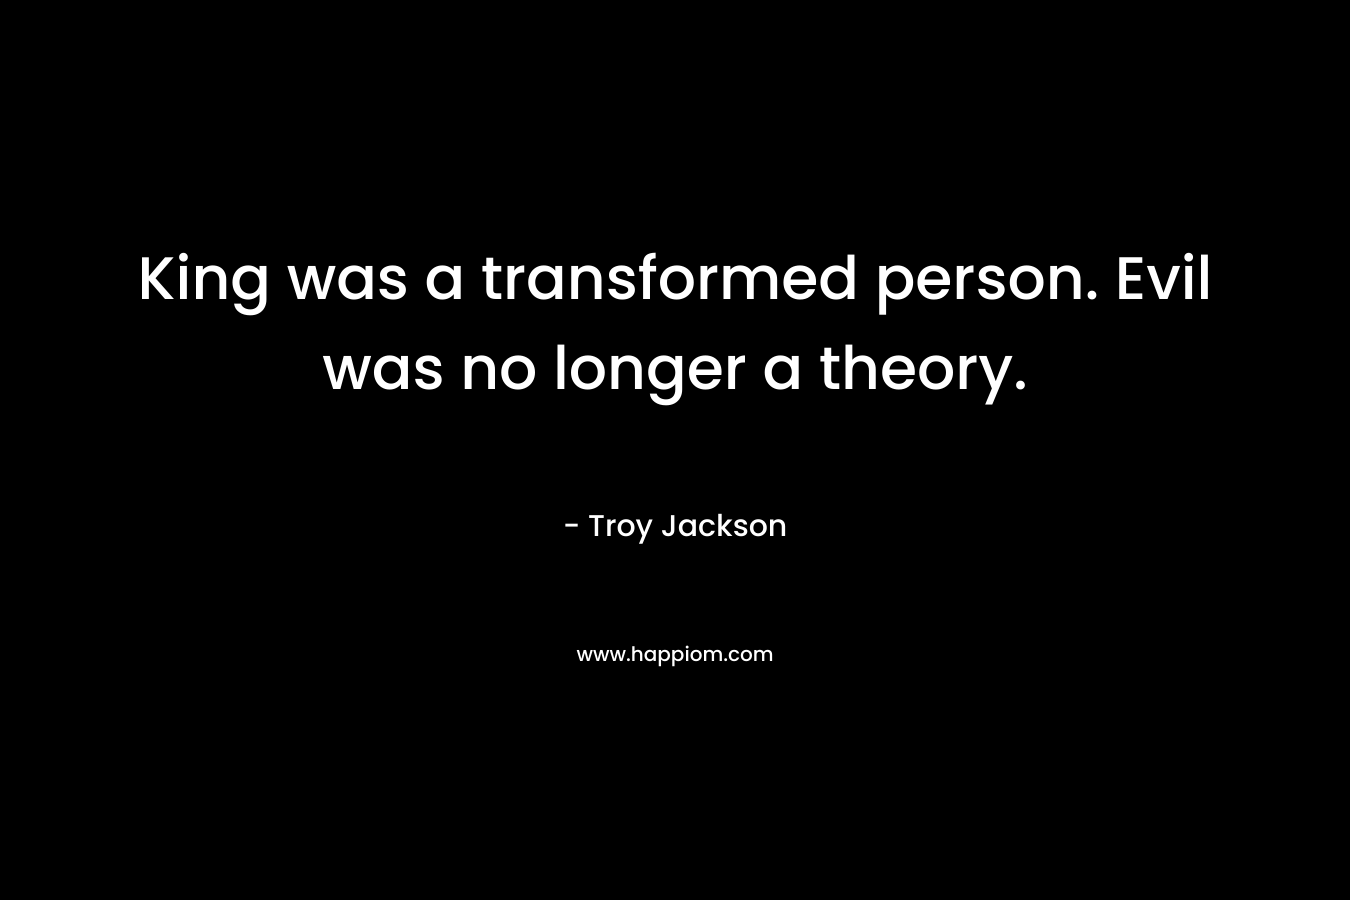 King was a transformed person. Evil was no longer a theory. – Troy Jackson